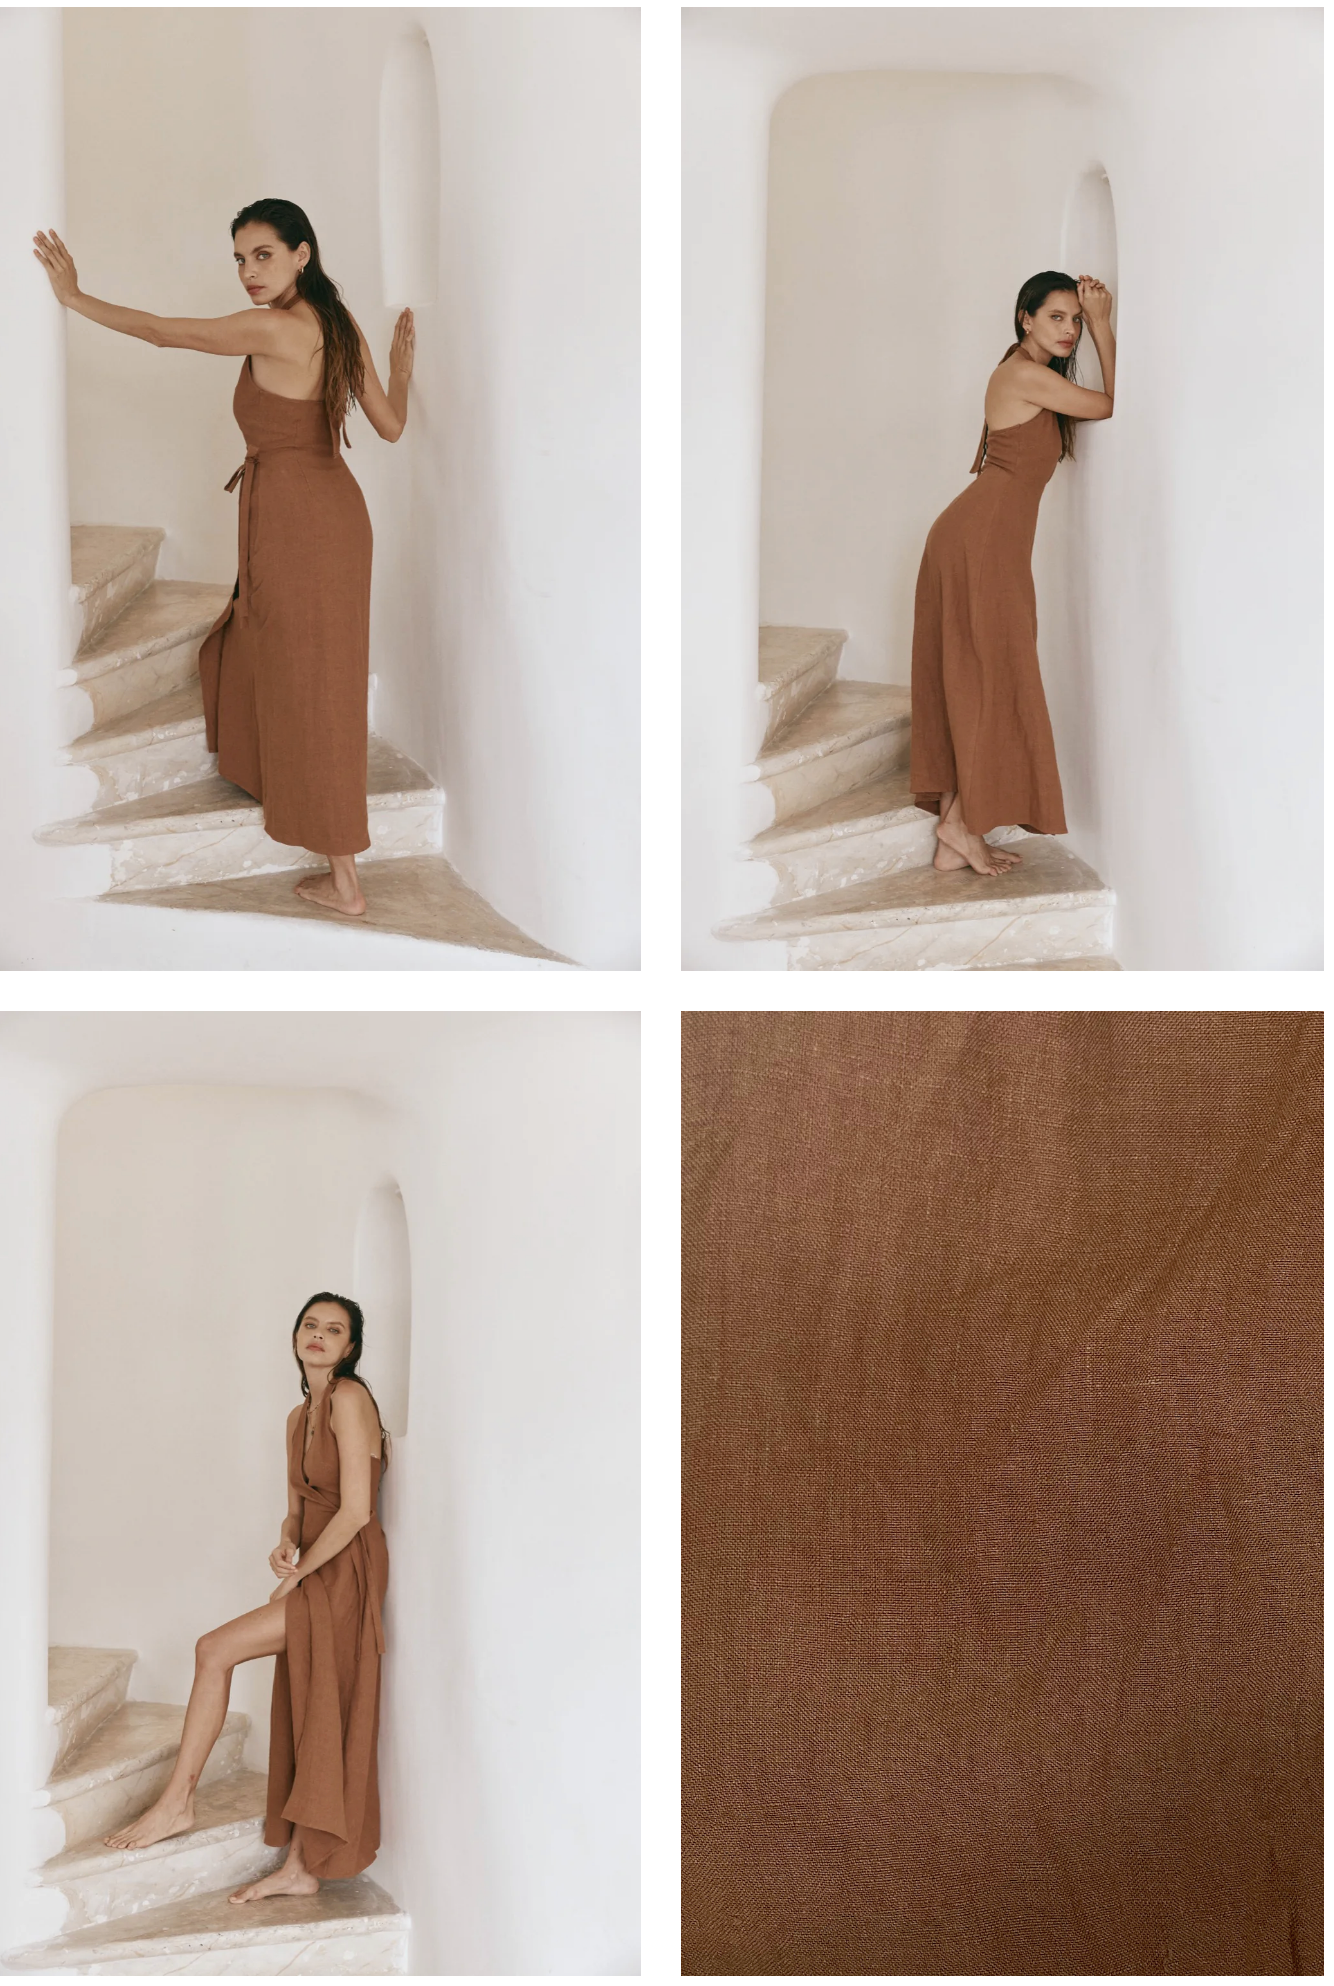 screenshot of product images for a dress